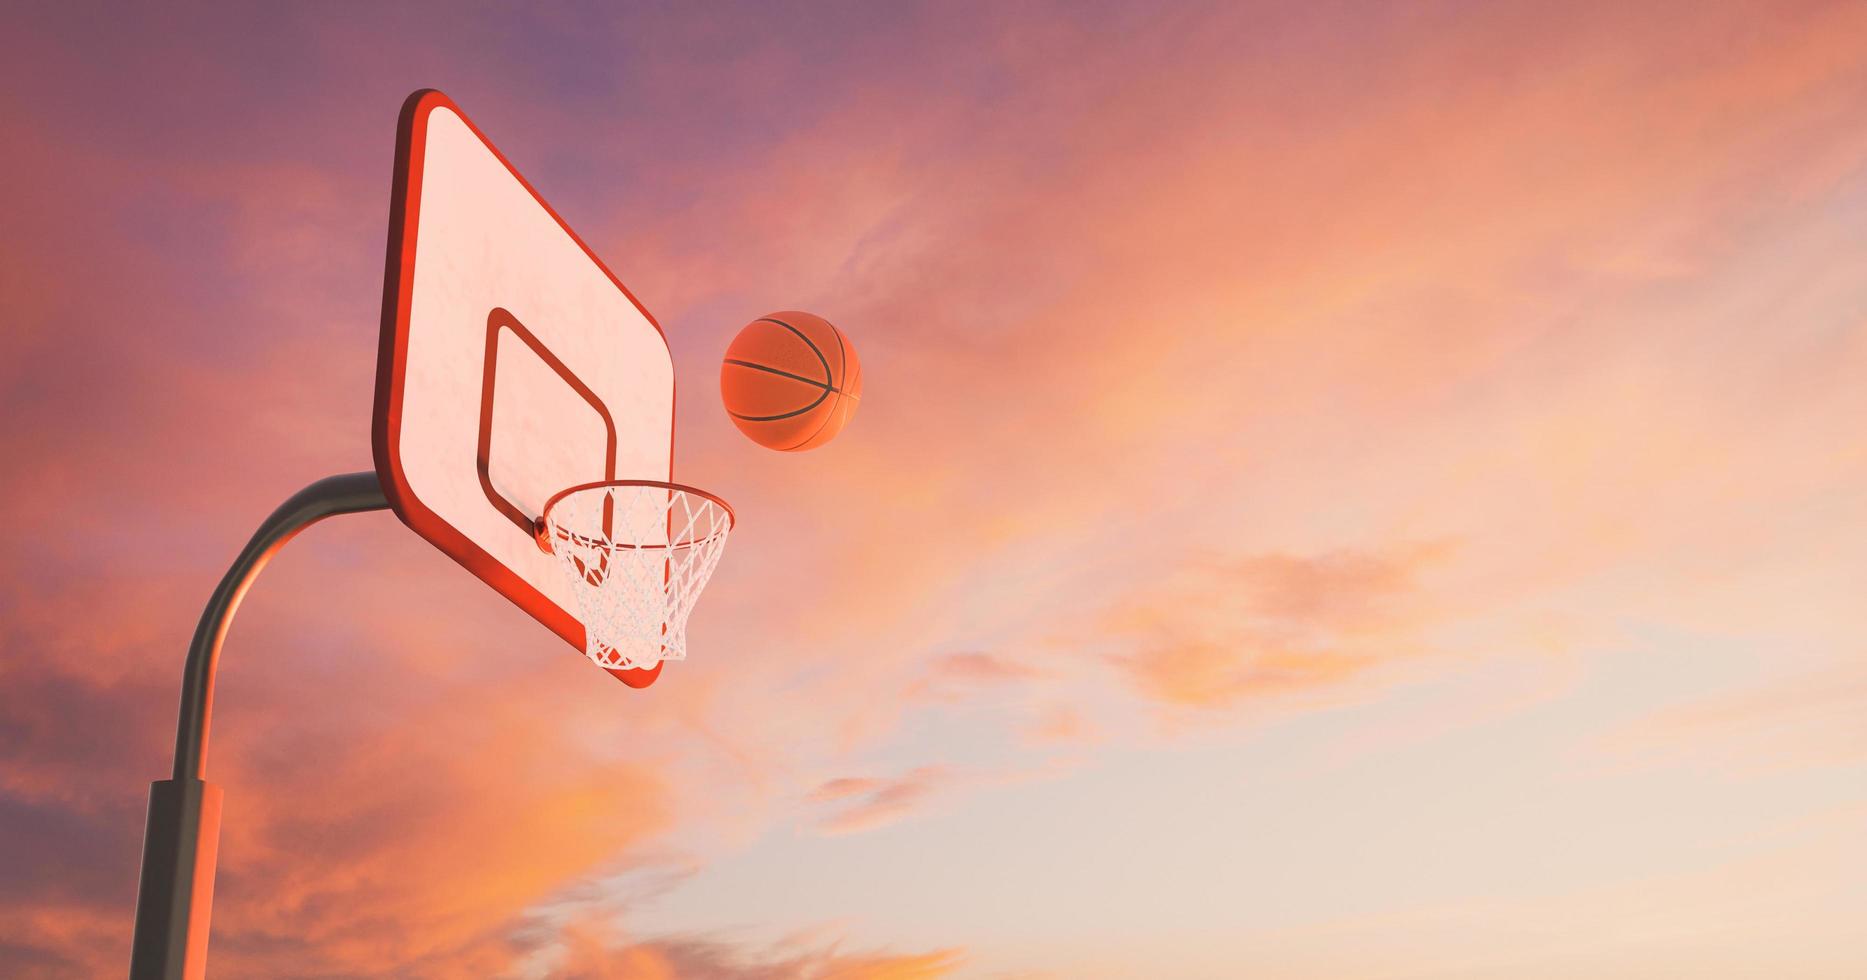 Basketball basket over a warm sunset with clouds and the ball falling into the hoop, 3d rendering photo